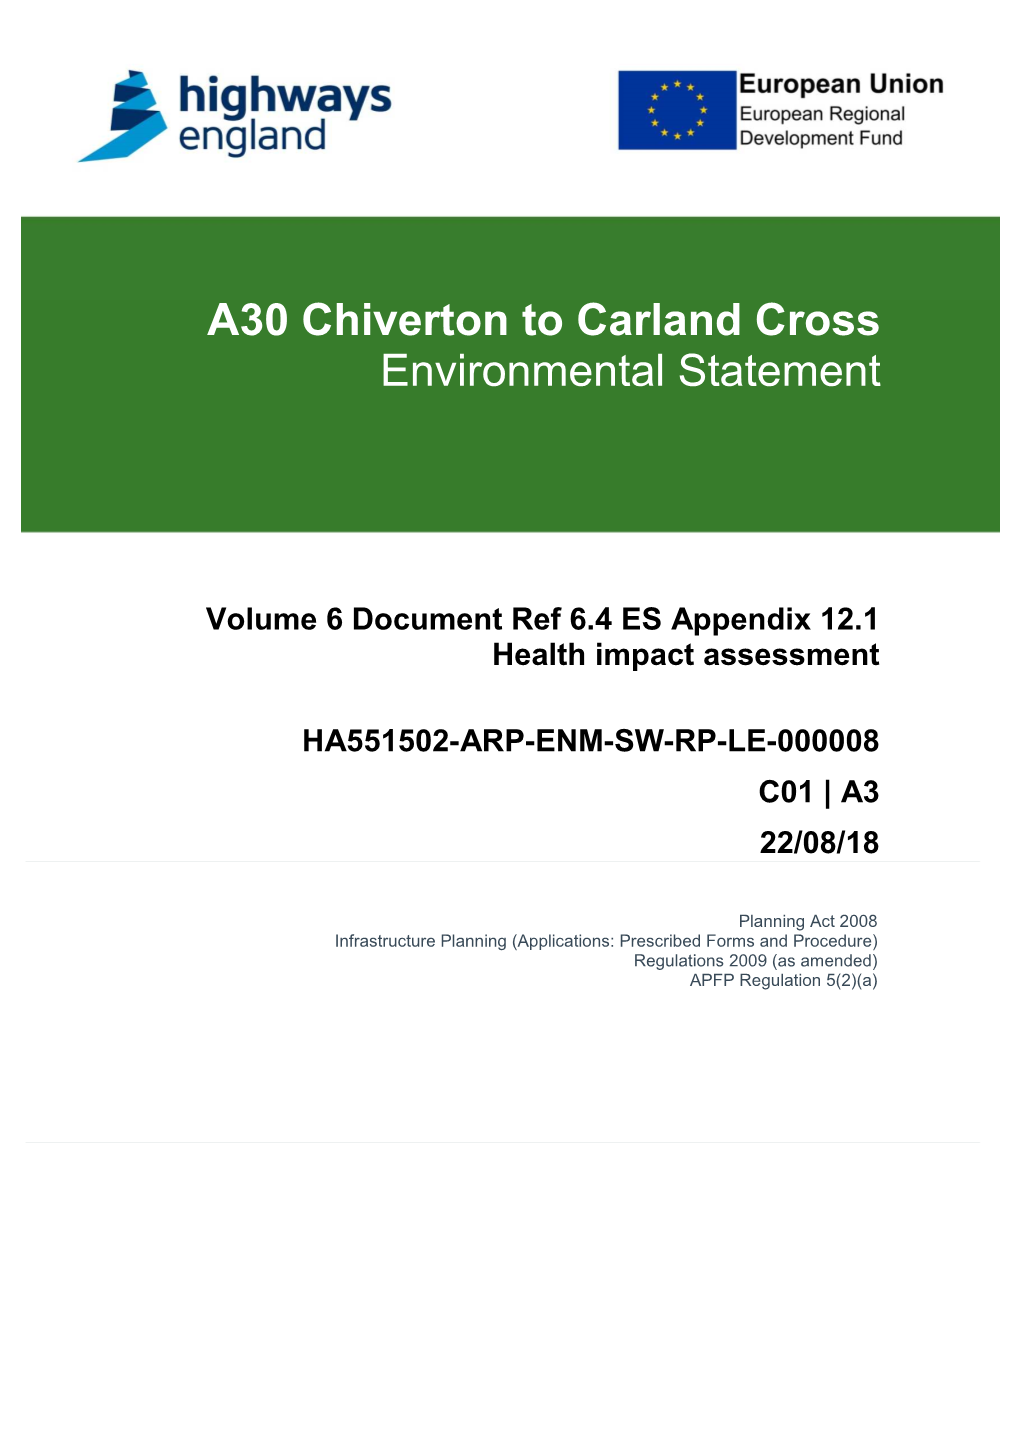 A30 Chiverton to Carland Cross Environmental Statement